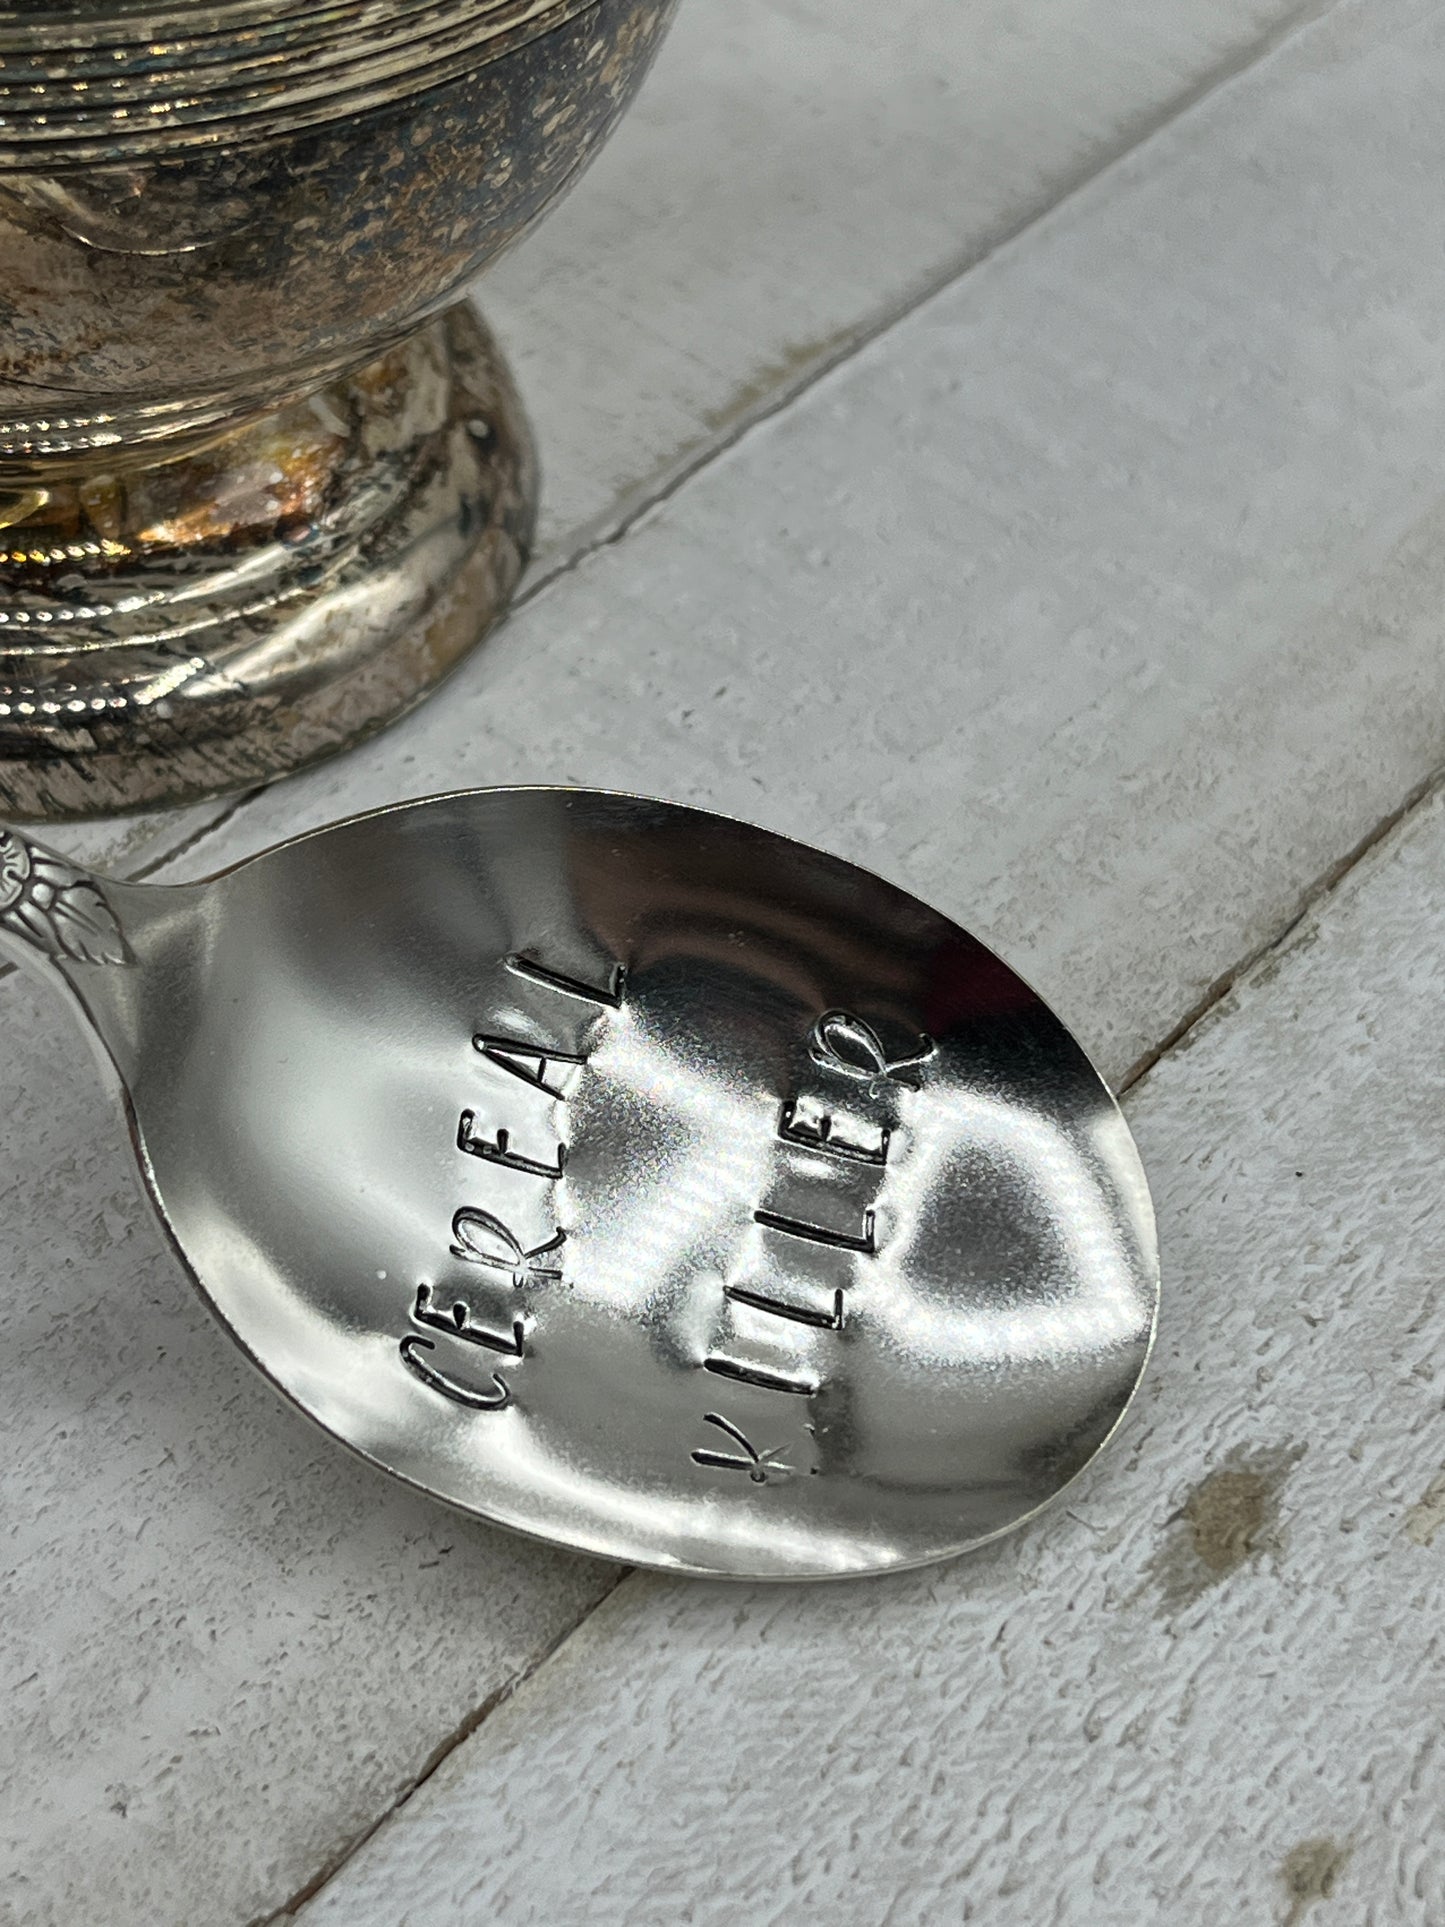 Hand Stamped Custom Coffee Spoon Made from Antique Silver Spoon